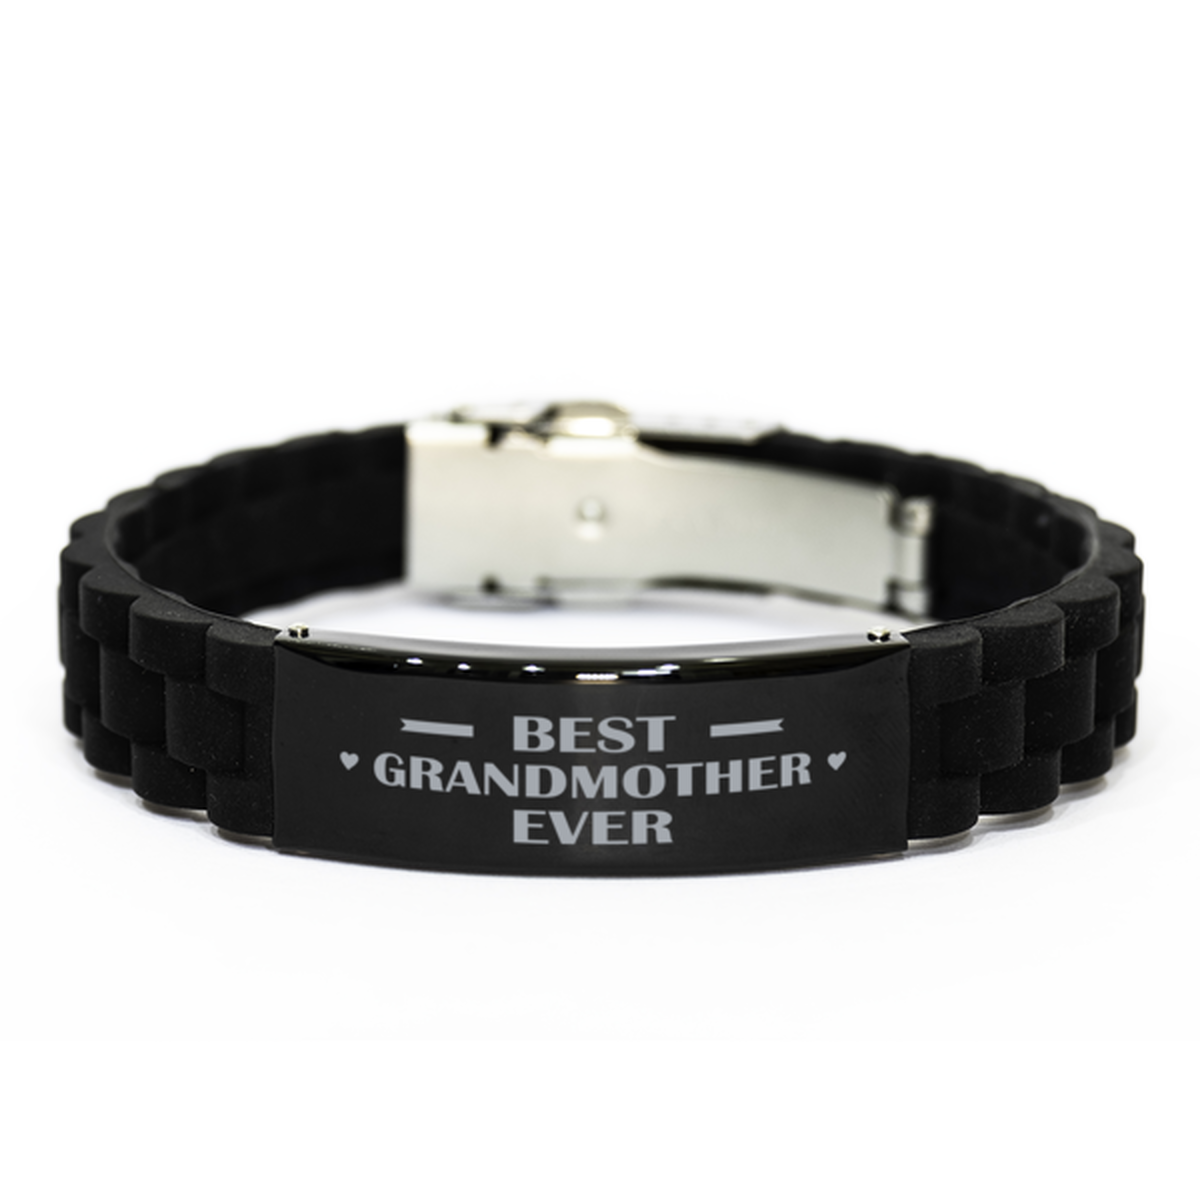 Best Grandmother Ever Grandmother Gifts, Funny Black Engraved Bracelet For Grandmother, Family Gifts For Women